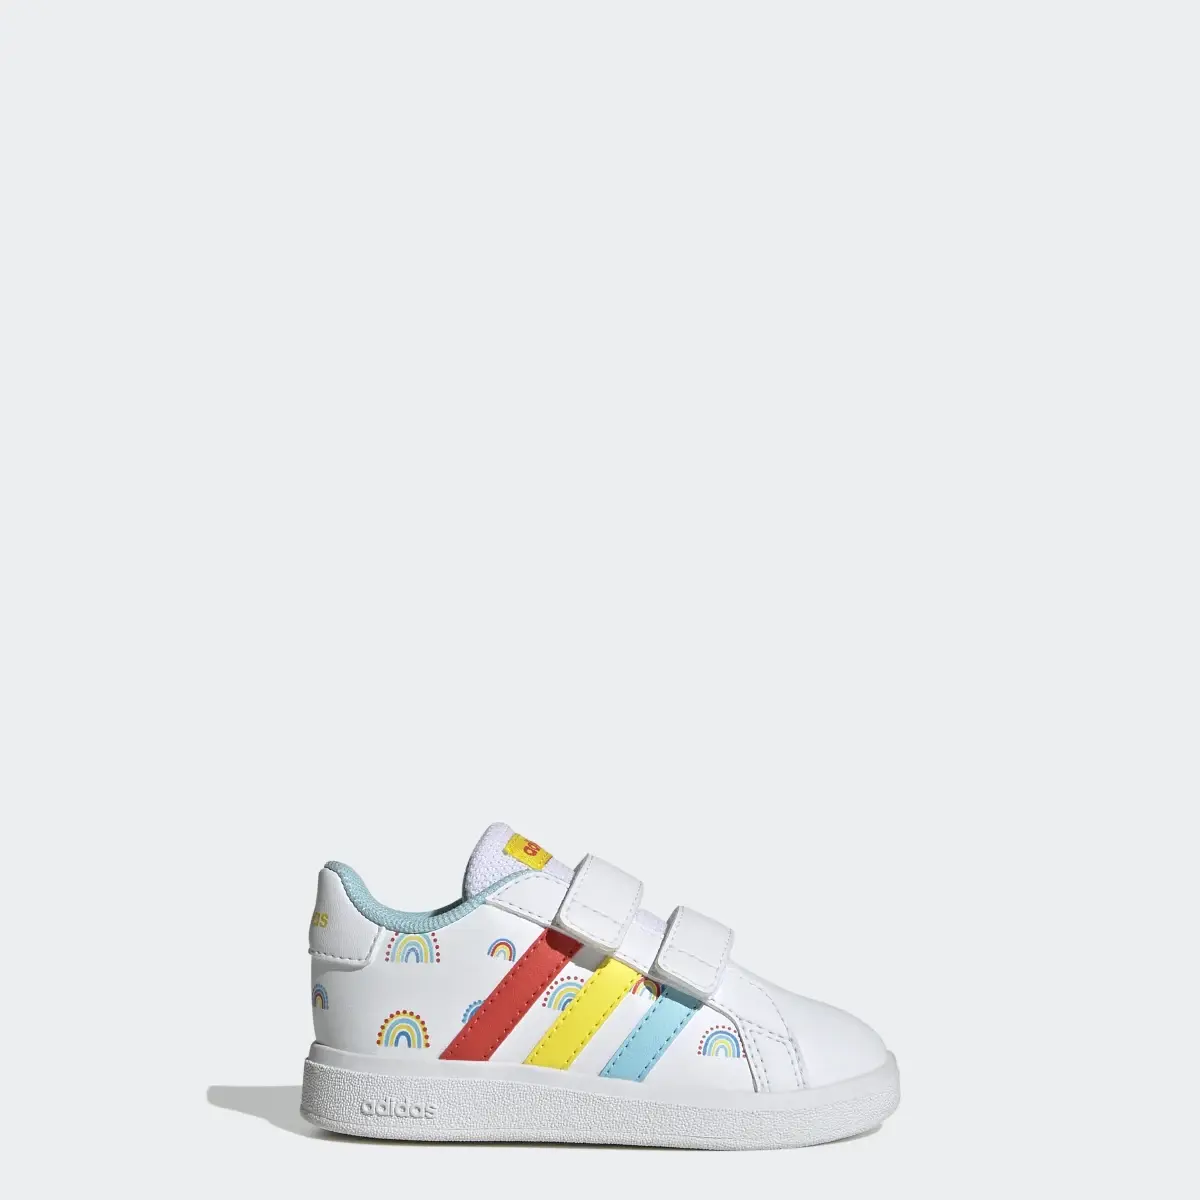 Adidas Grand Court Sustainable Lifestyle Court Two-Strap Hook-and-Loop Shoes. 1